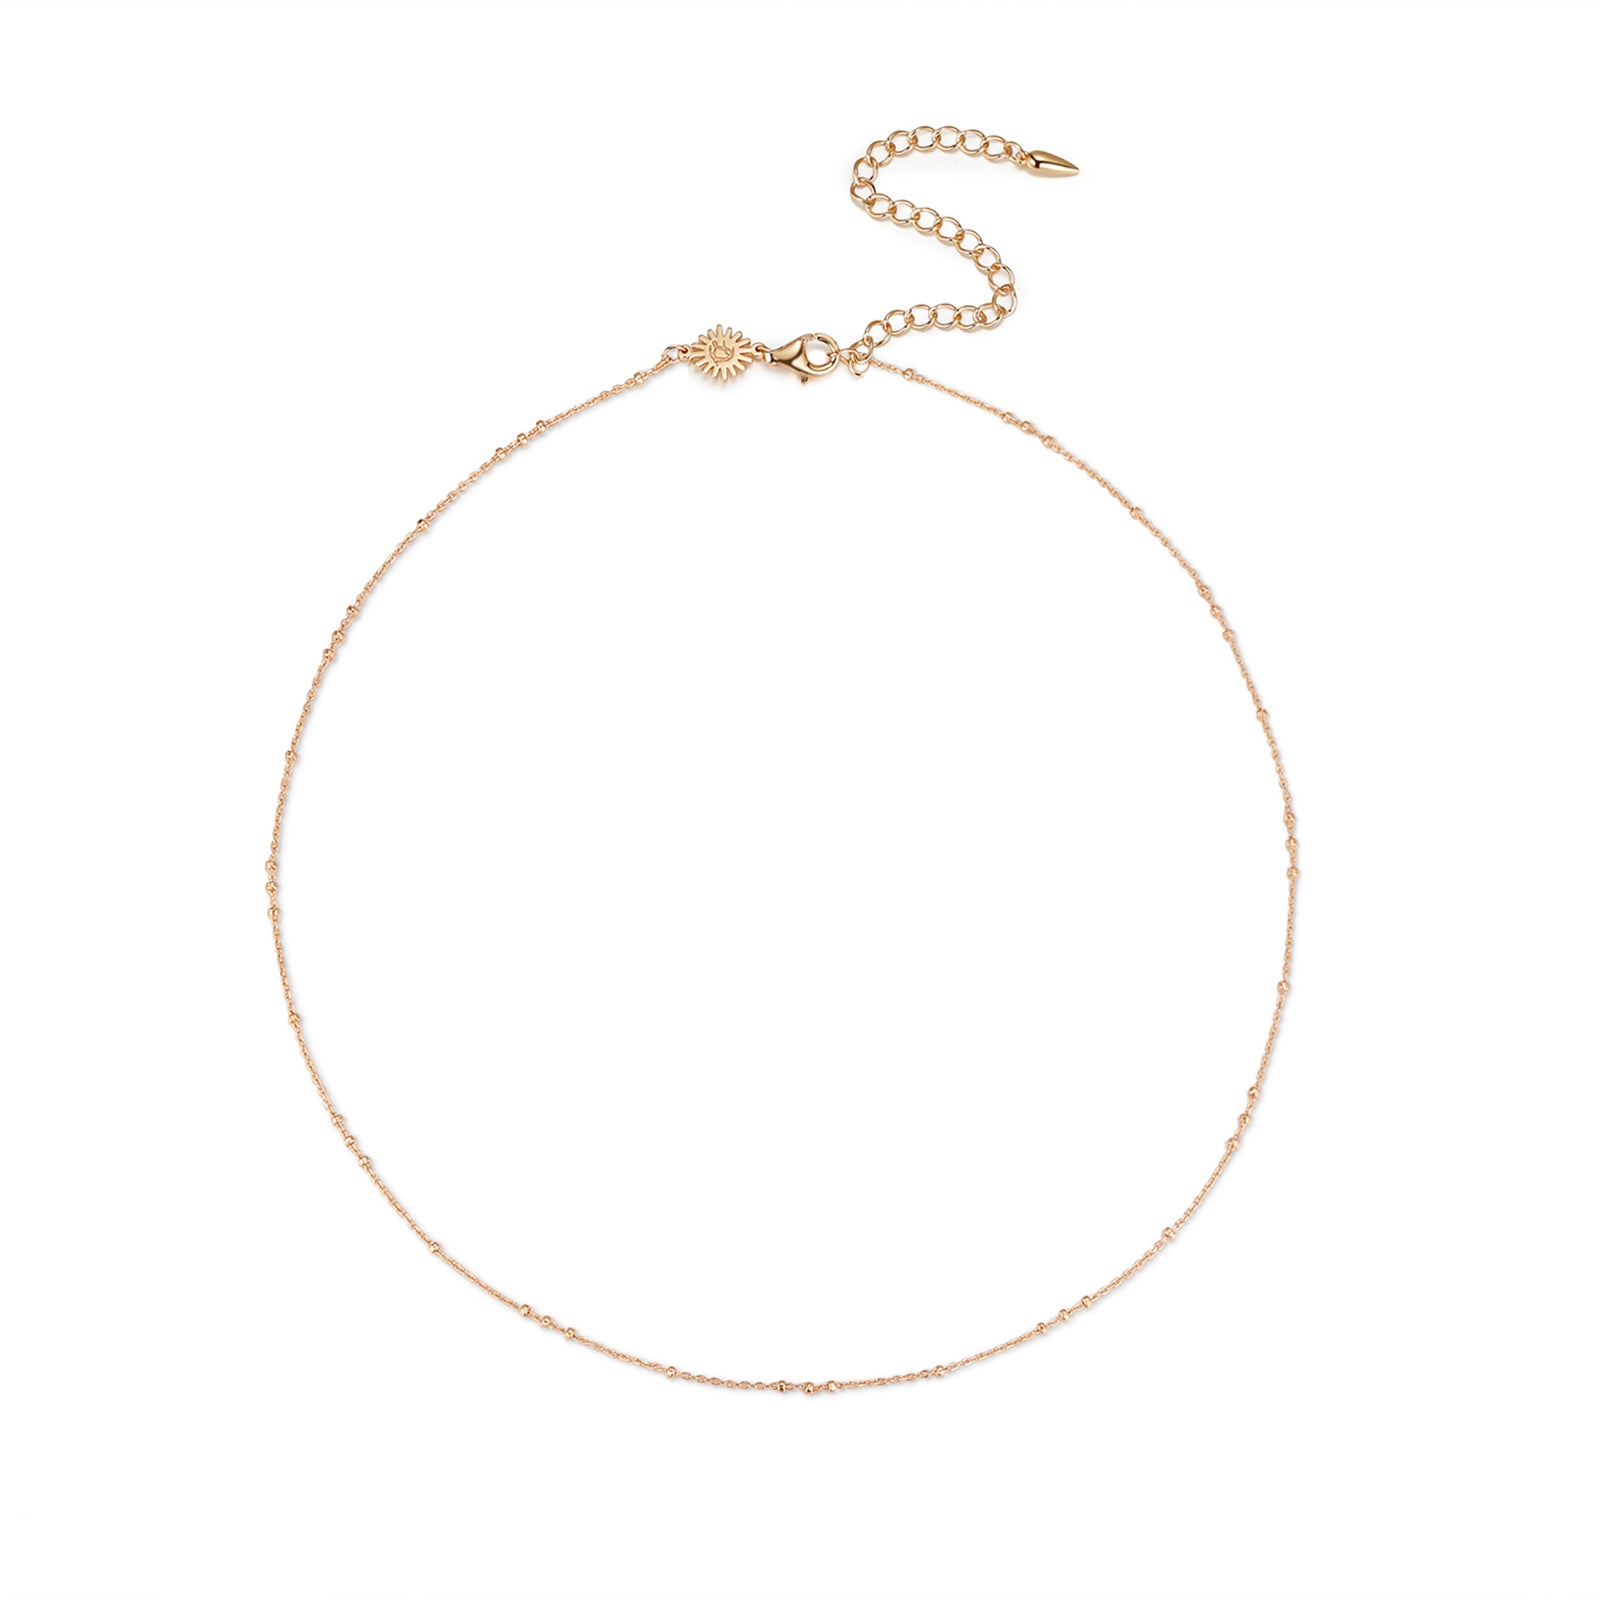 Gold Dainty Beaded Necklace Chain | LOVE BY THE MOON